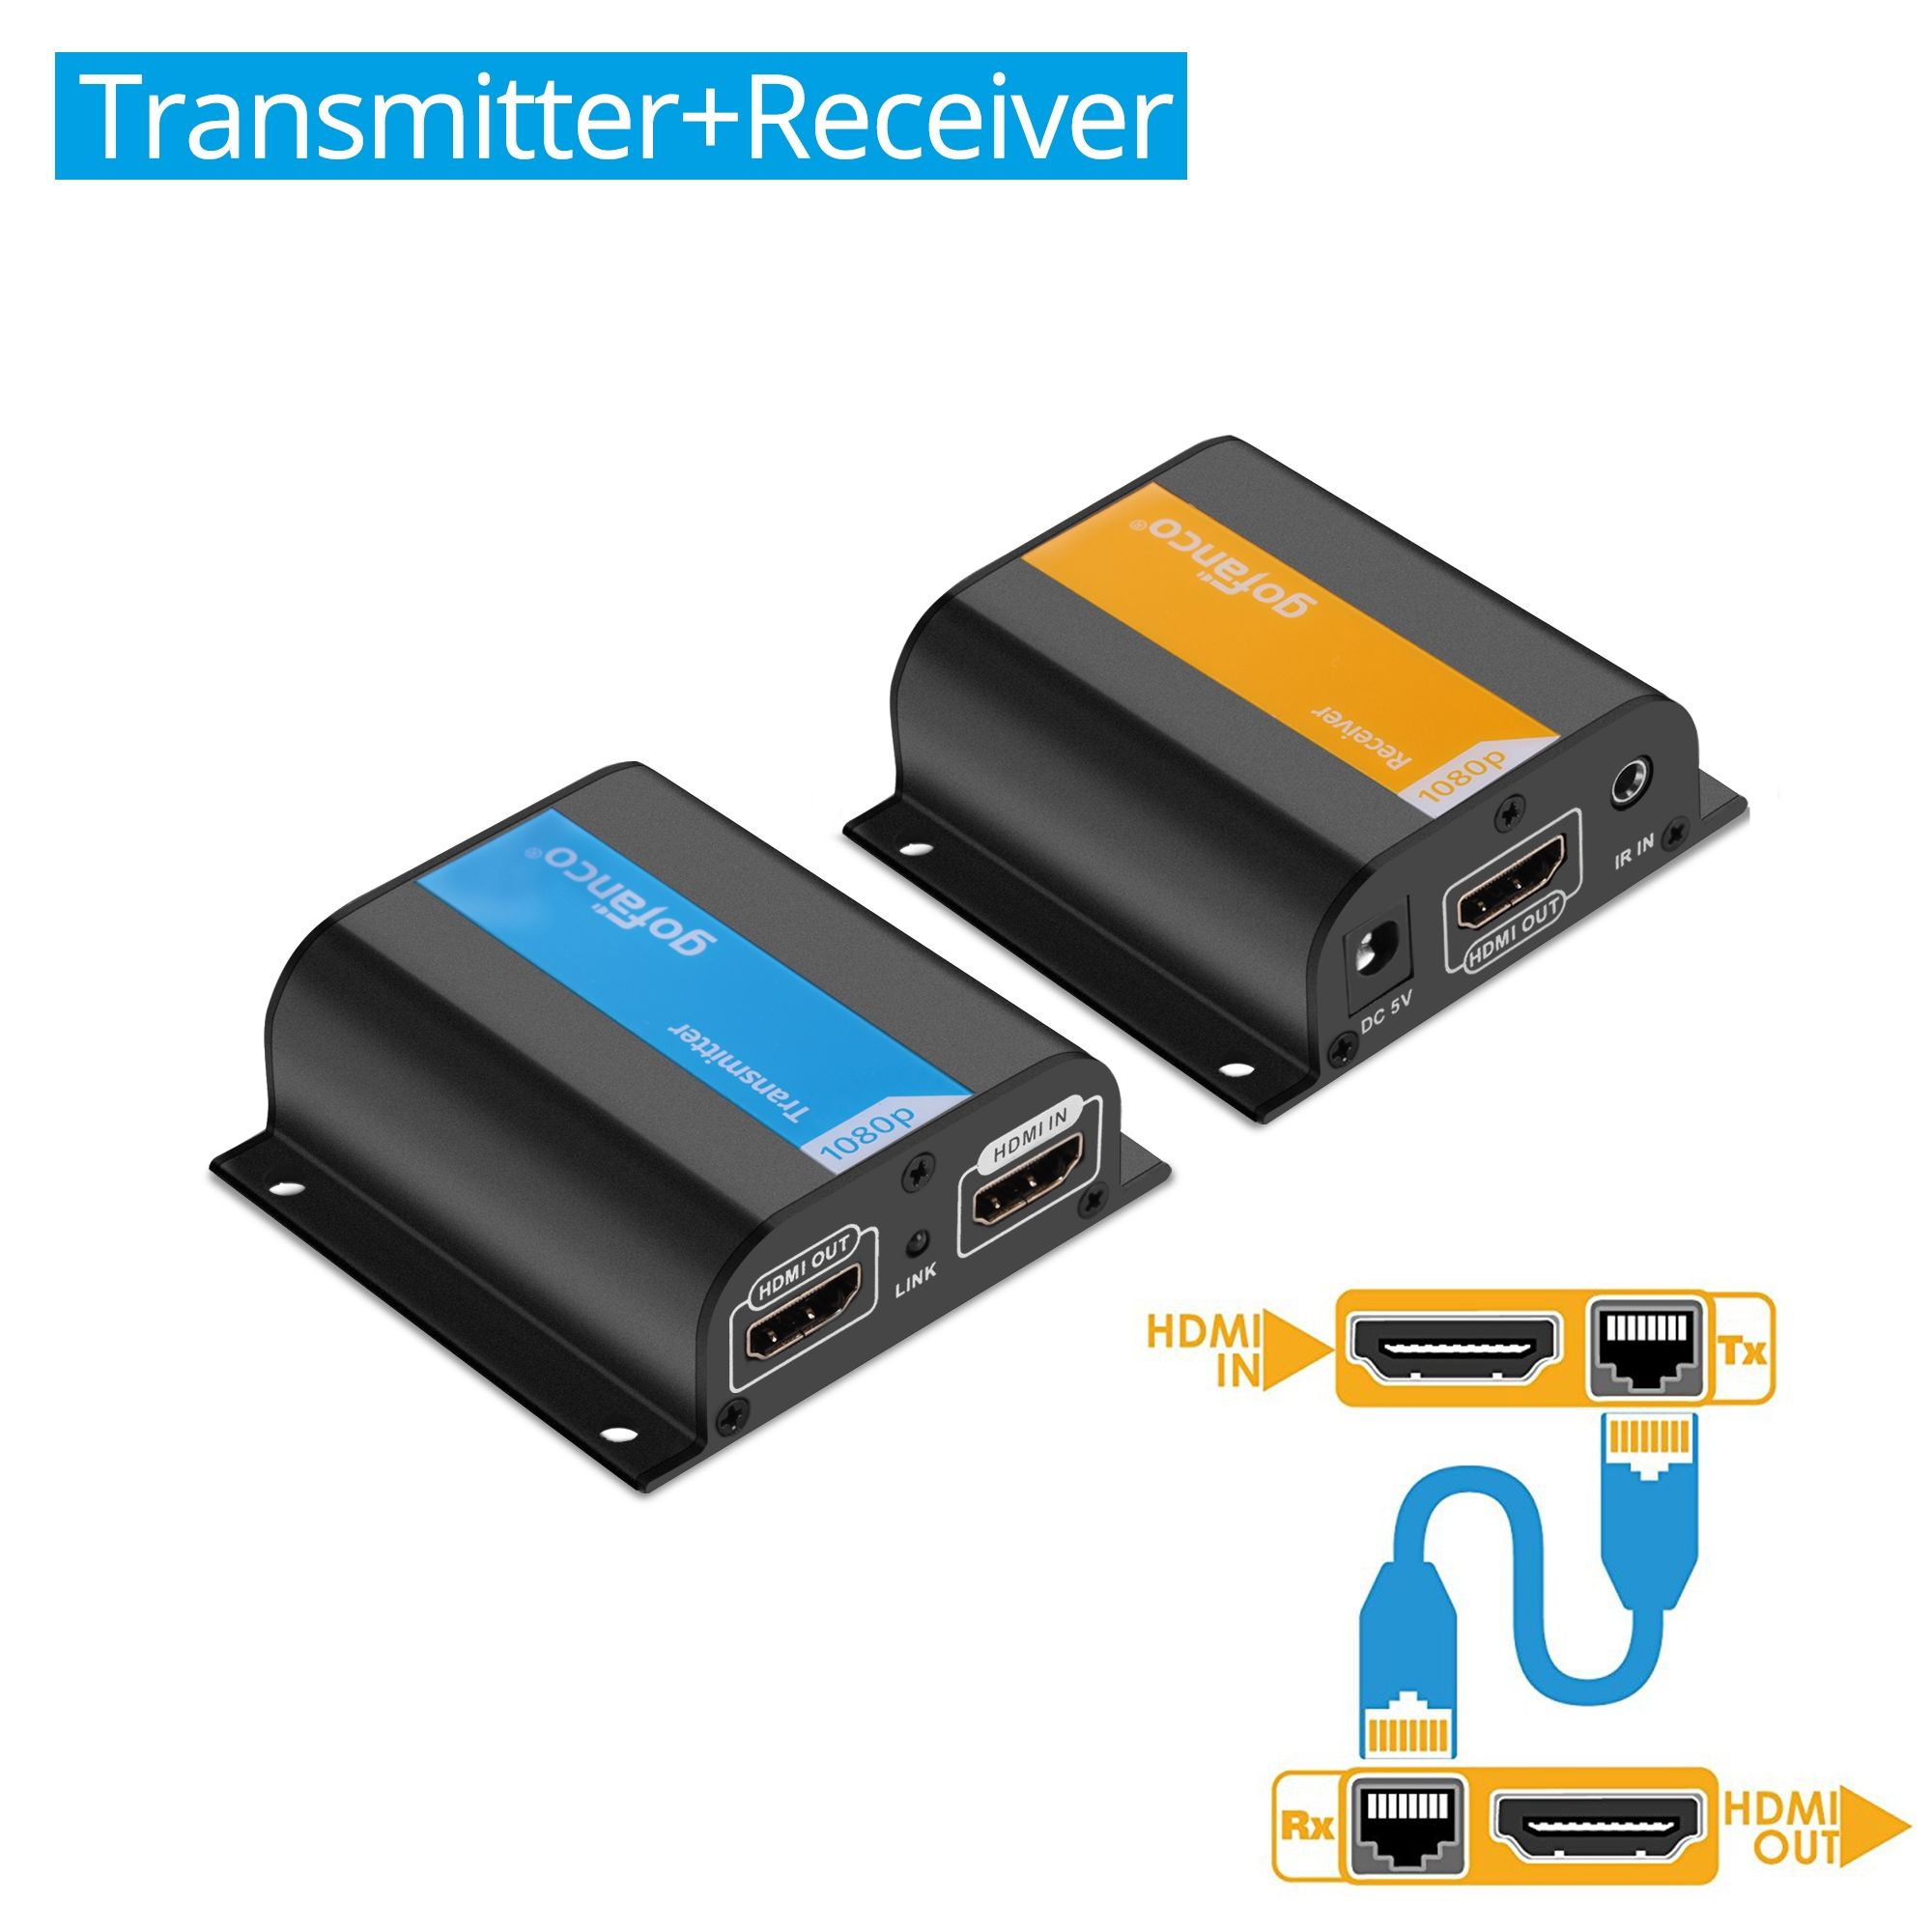 How Does an HDMI Extender Work?